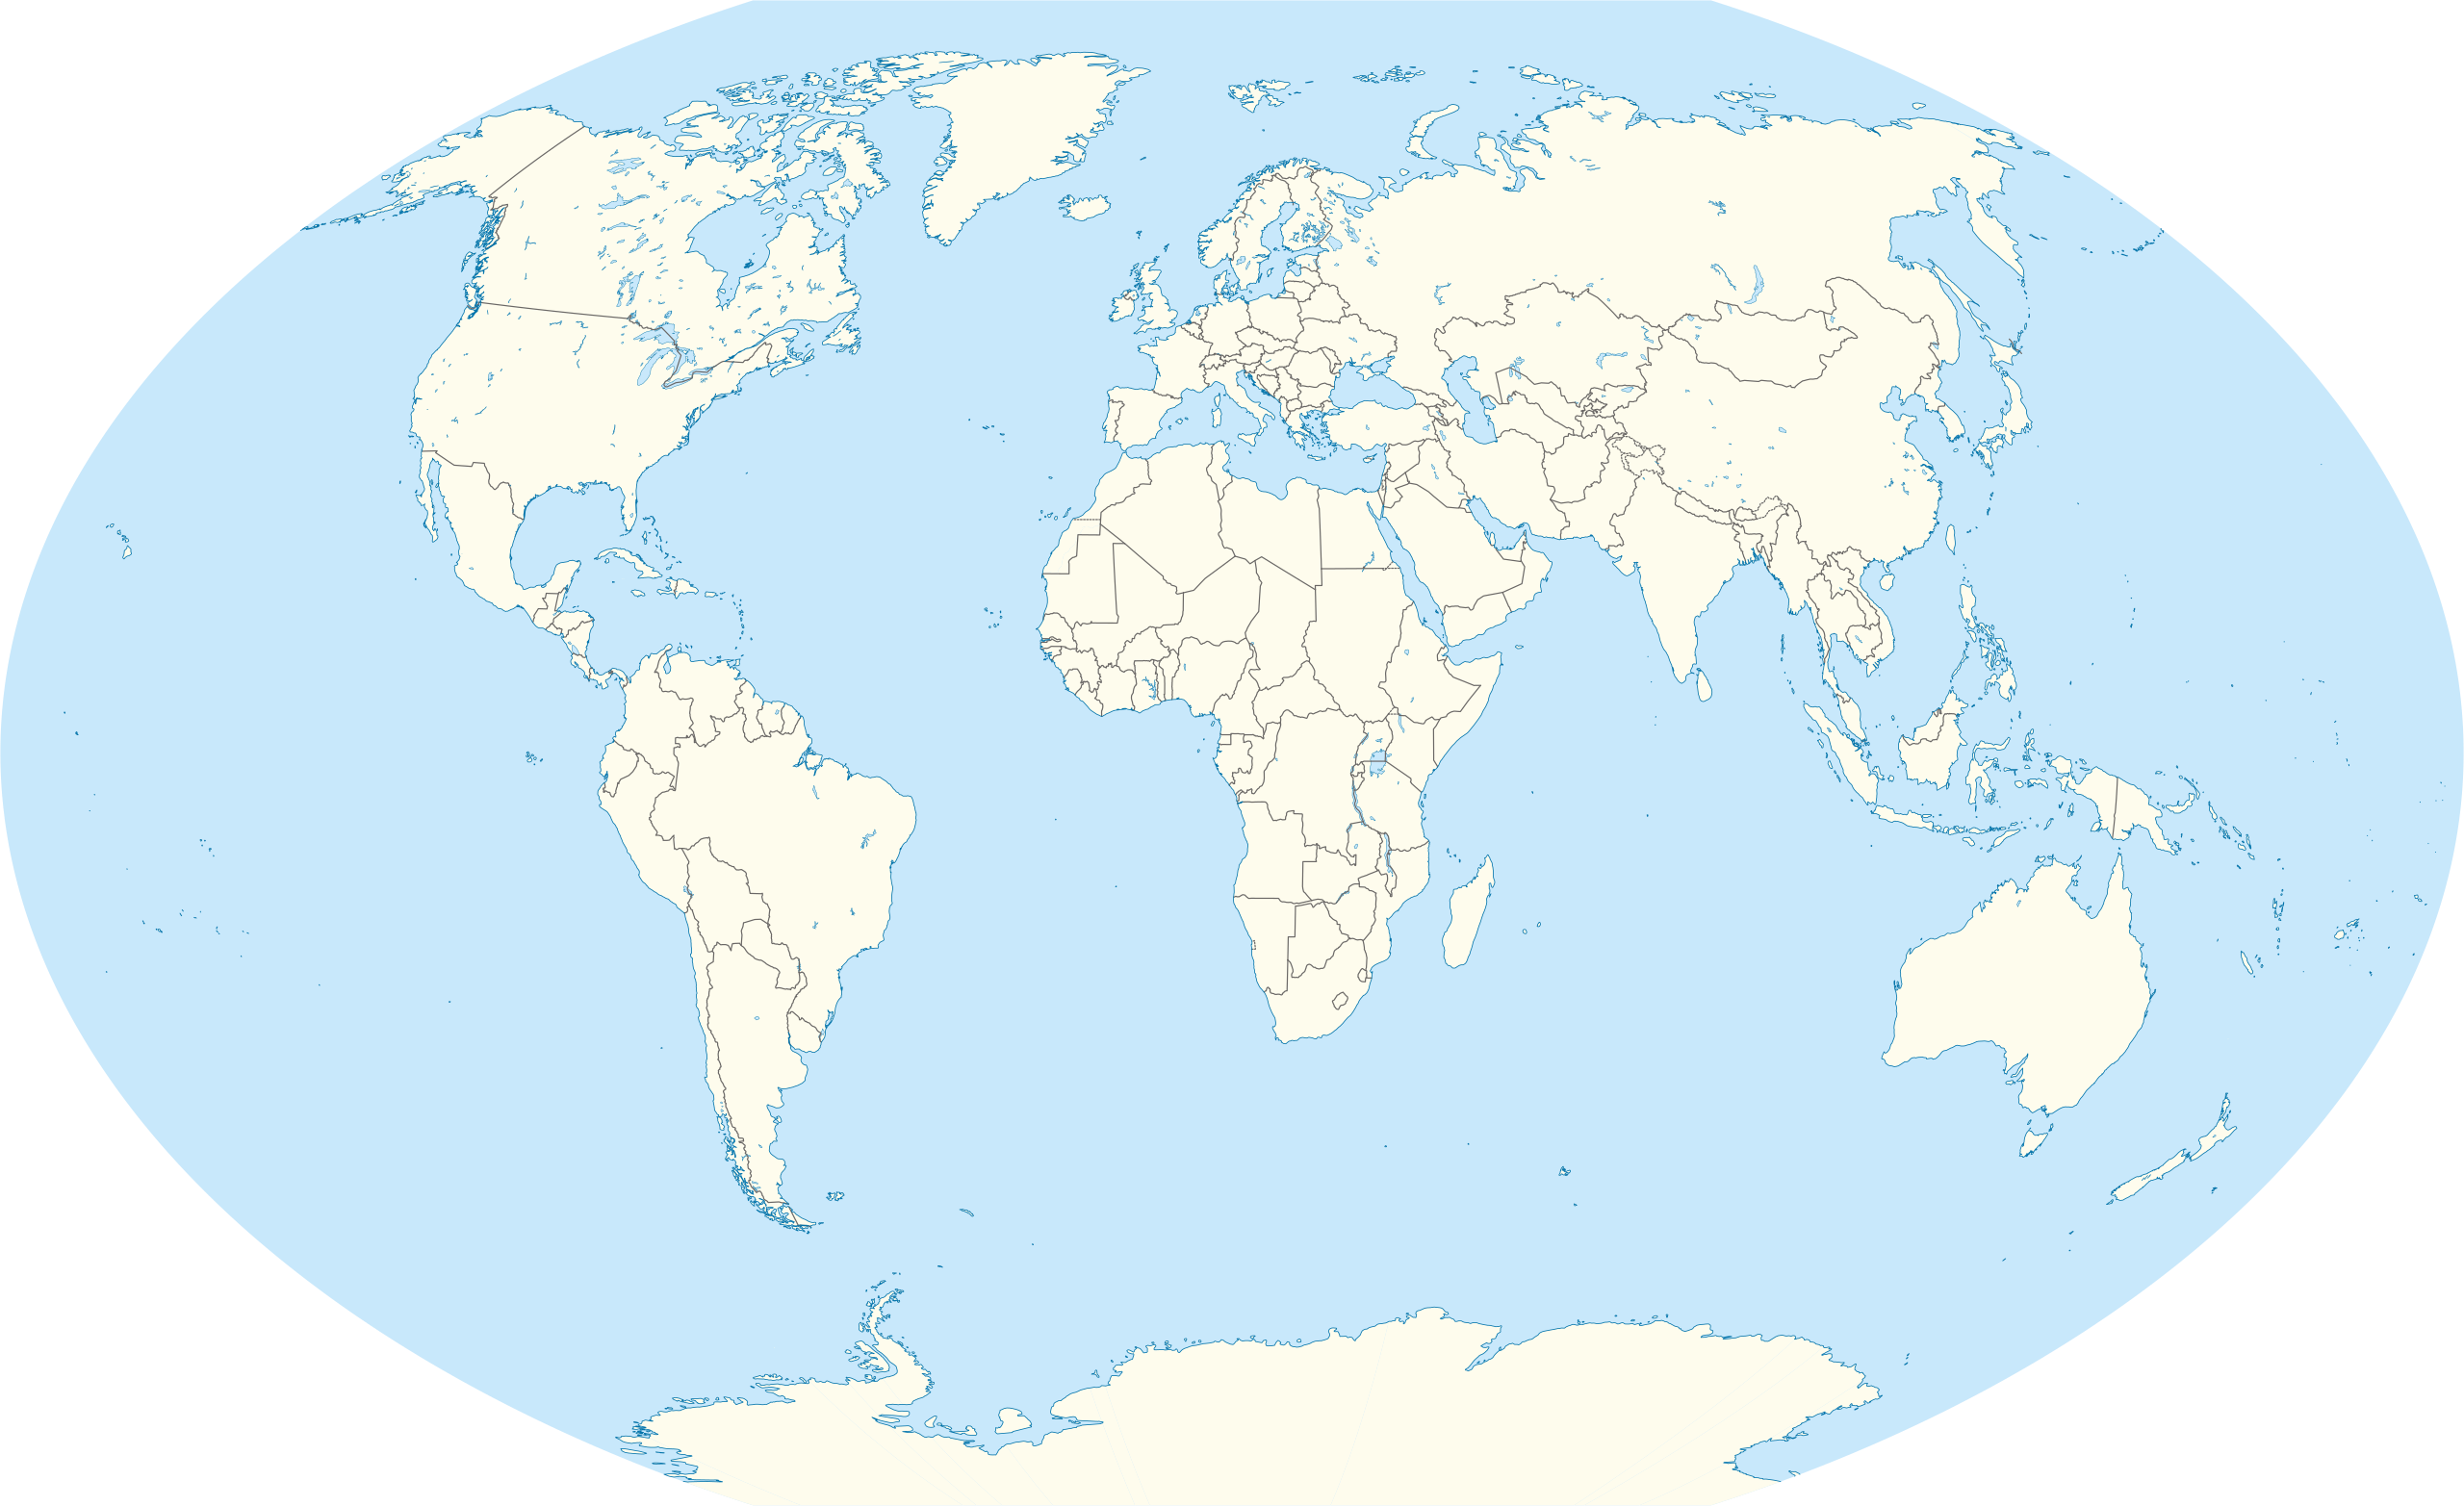 File:World map blank without borders.svg - Wikimedia Commons